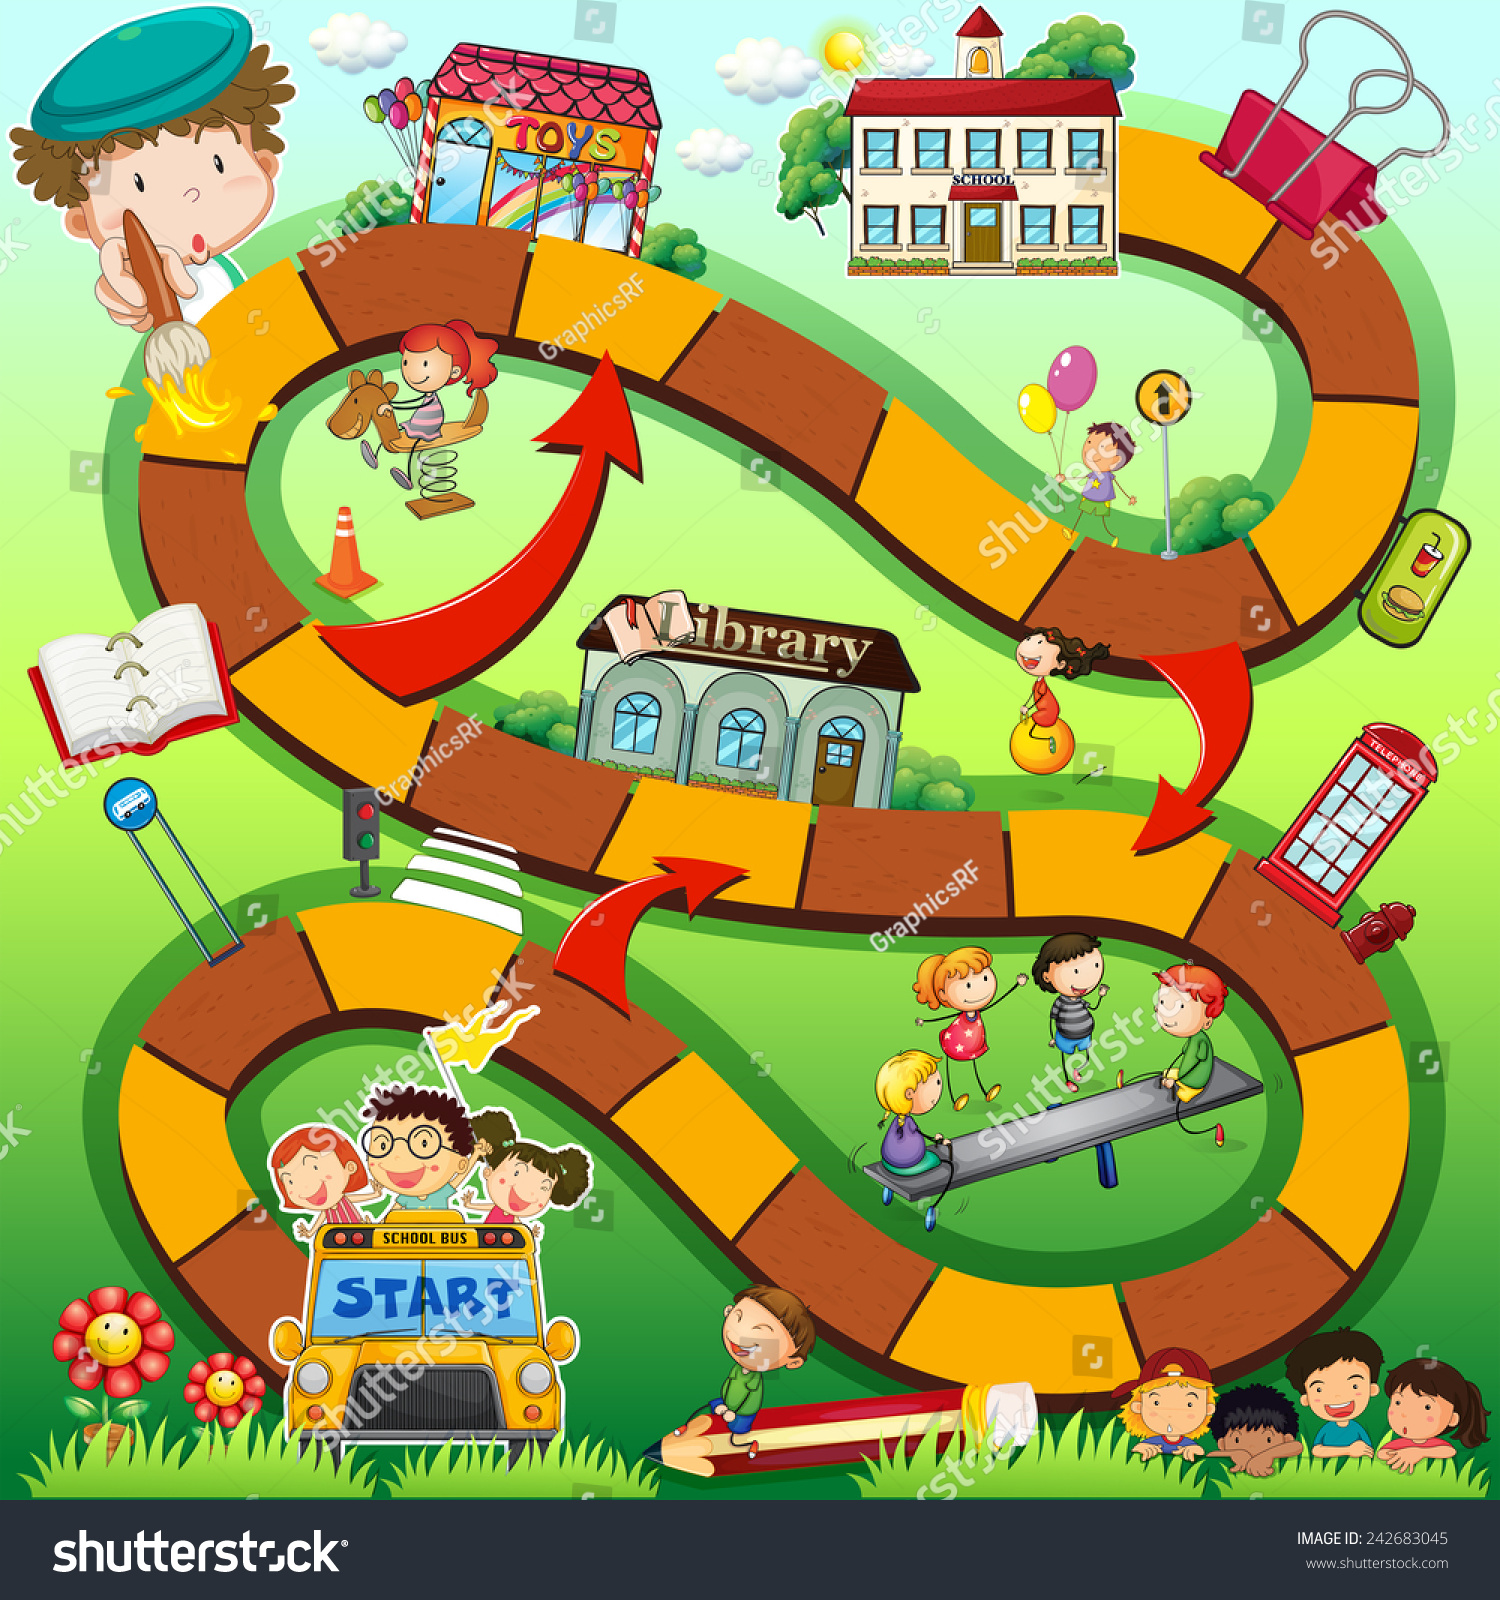 Illustration Of A Boardgame With School Background 242683045